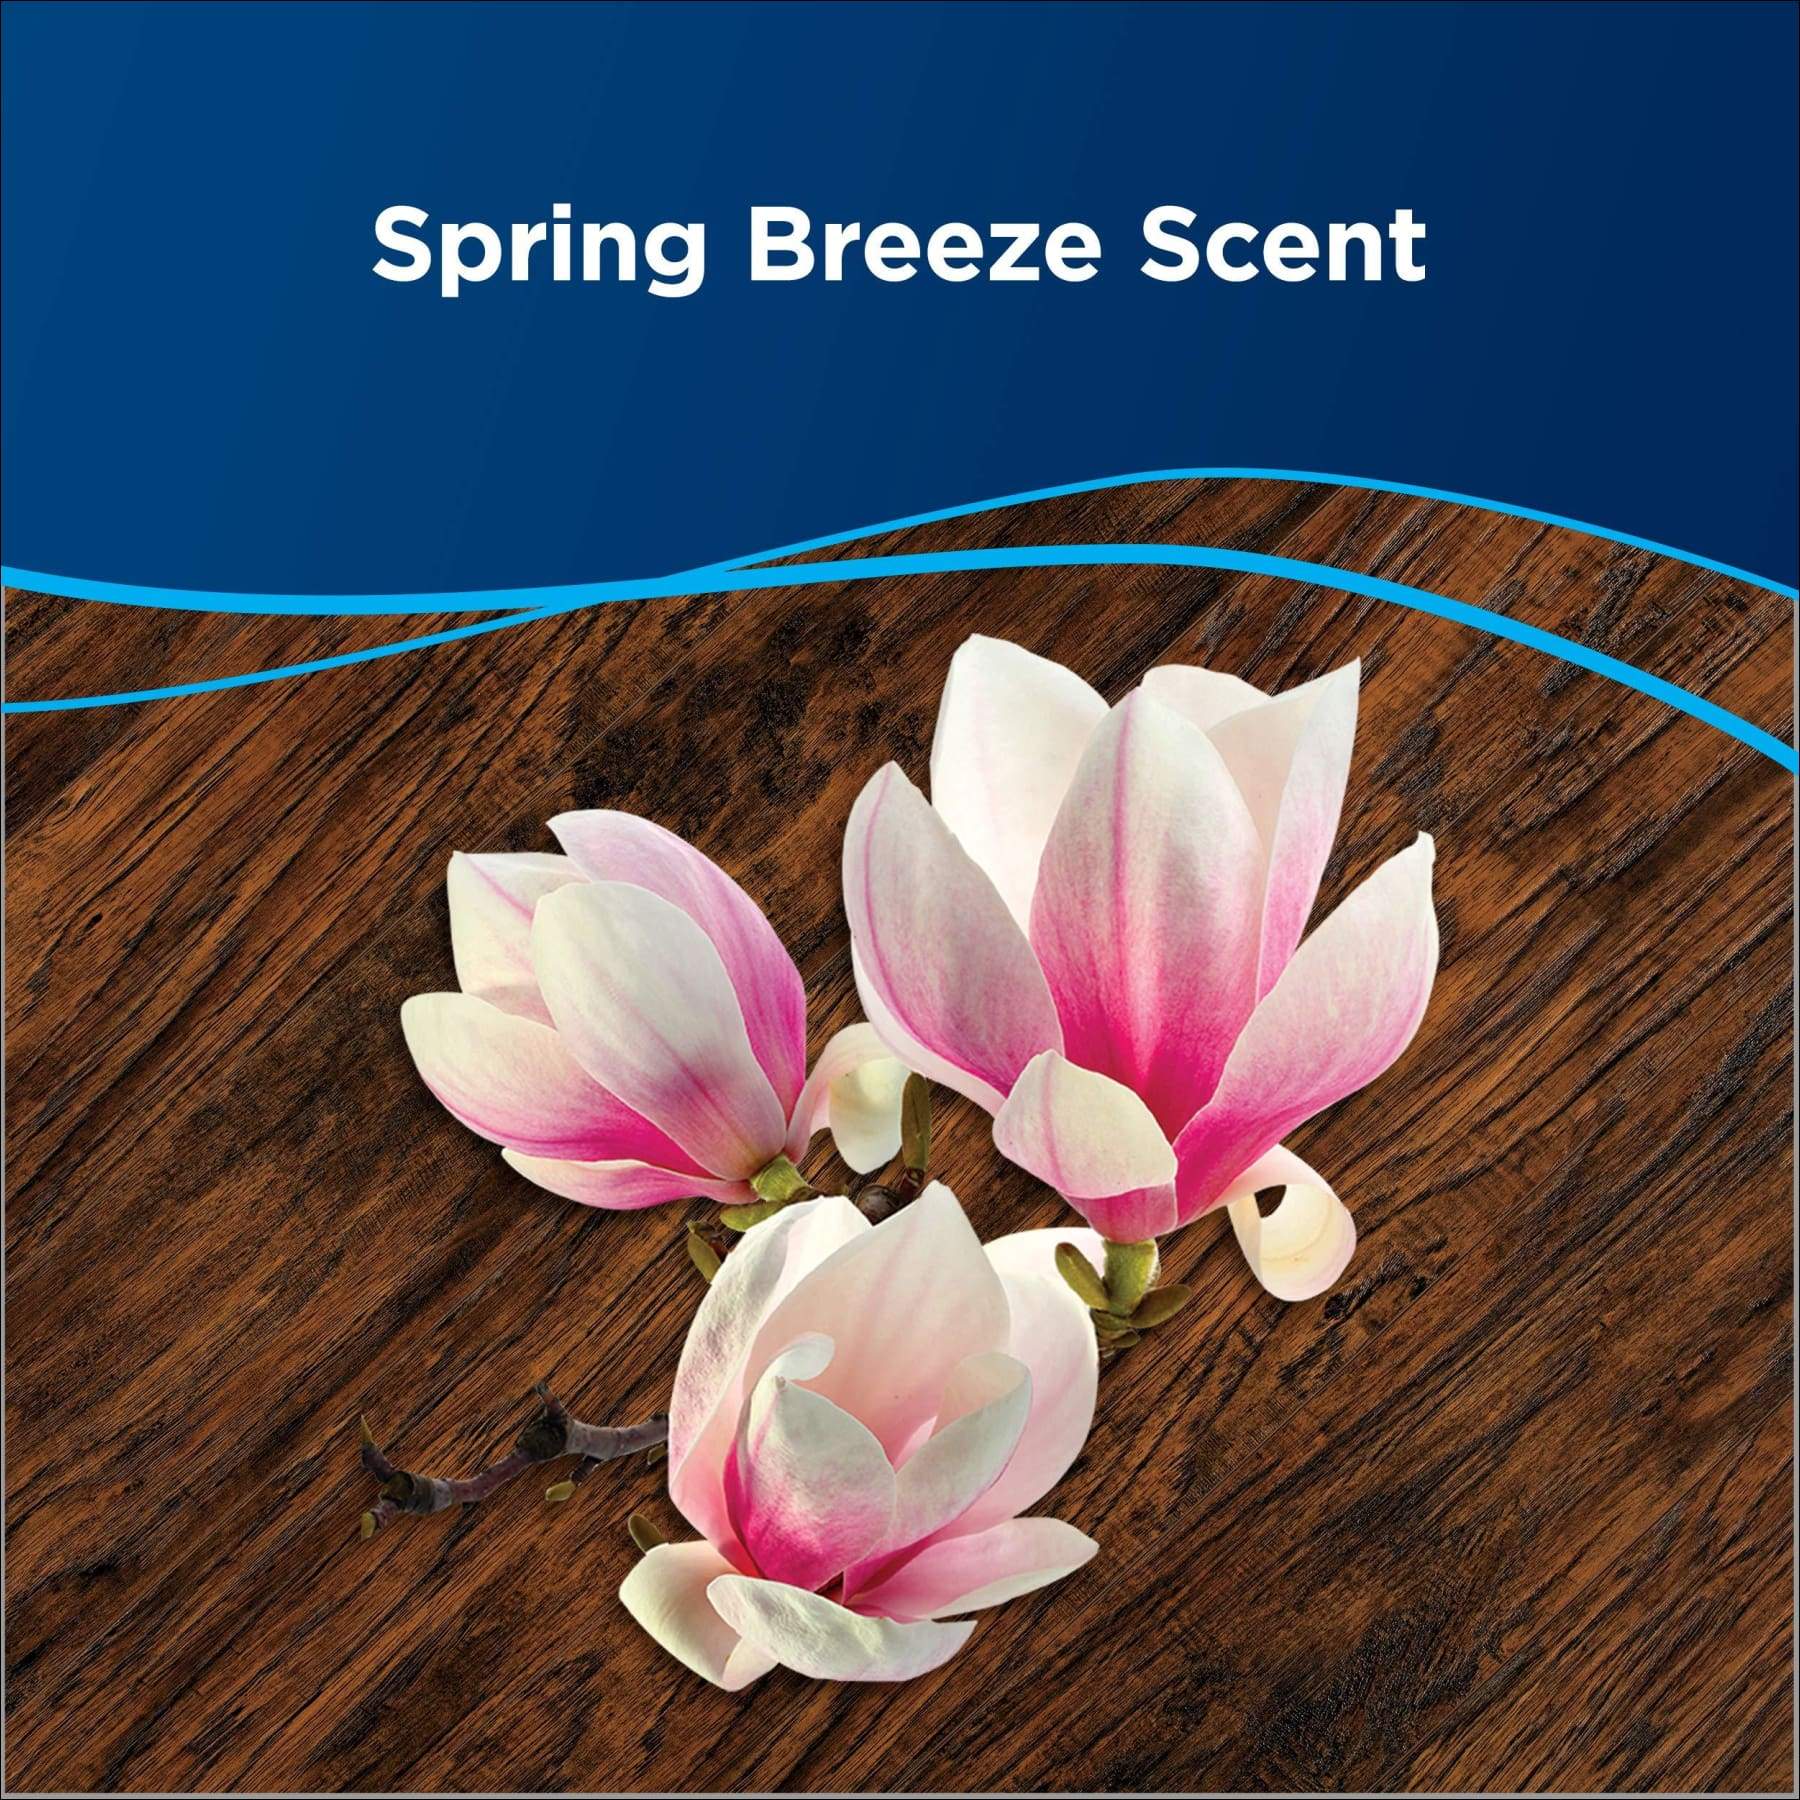 BISSELL Surface Cleaners, Spring Breeze Scent, 64 Fluid Ounce 17891 - image 5 of 7